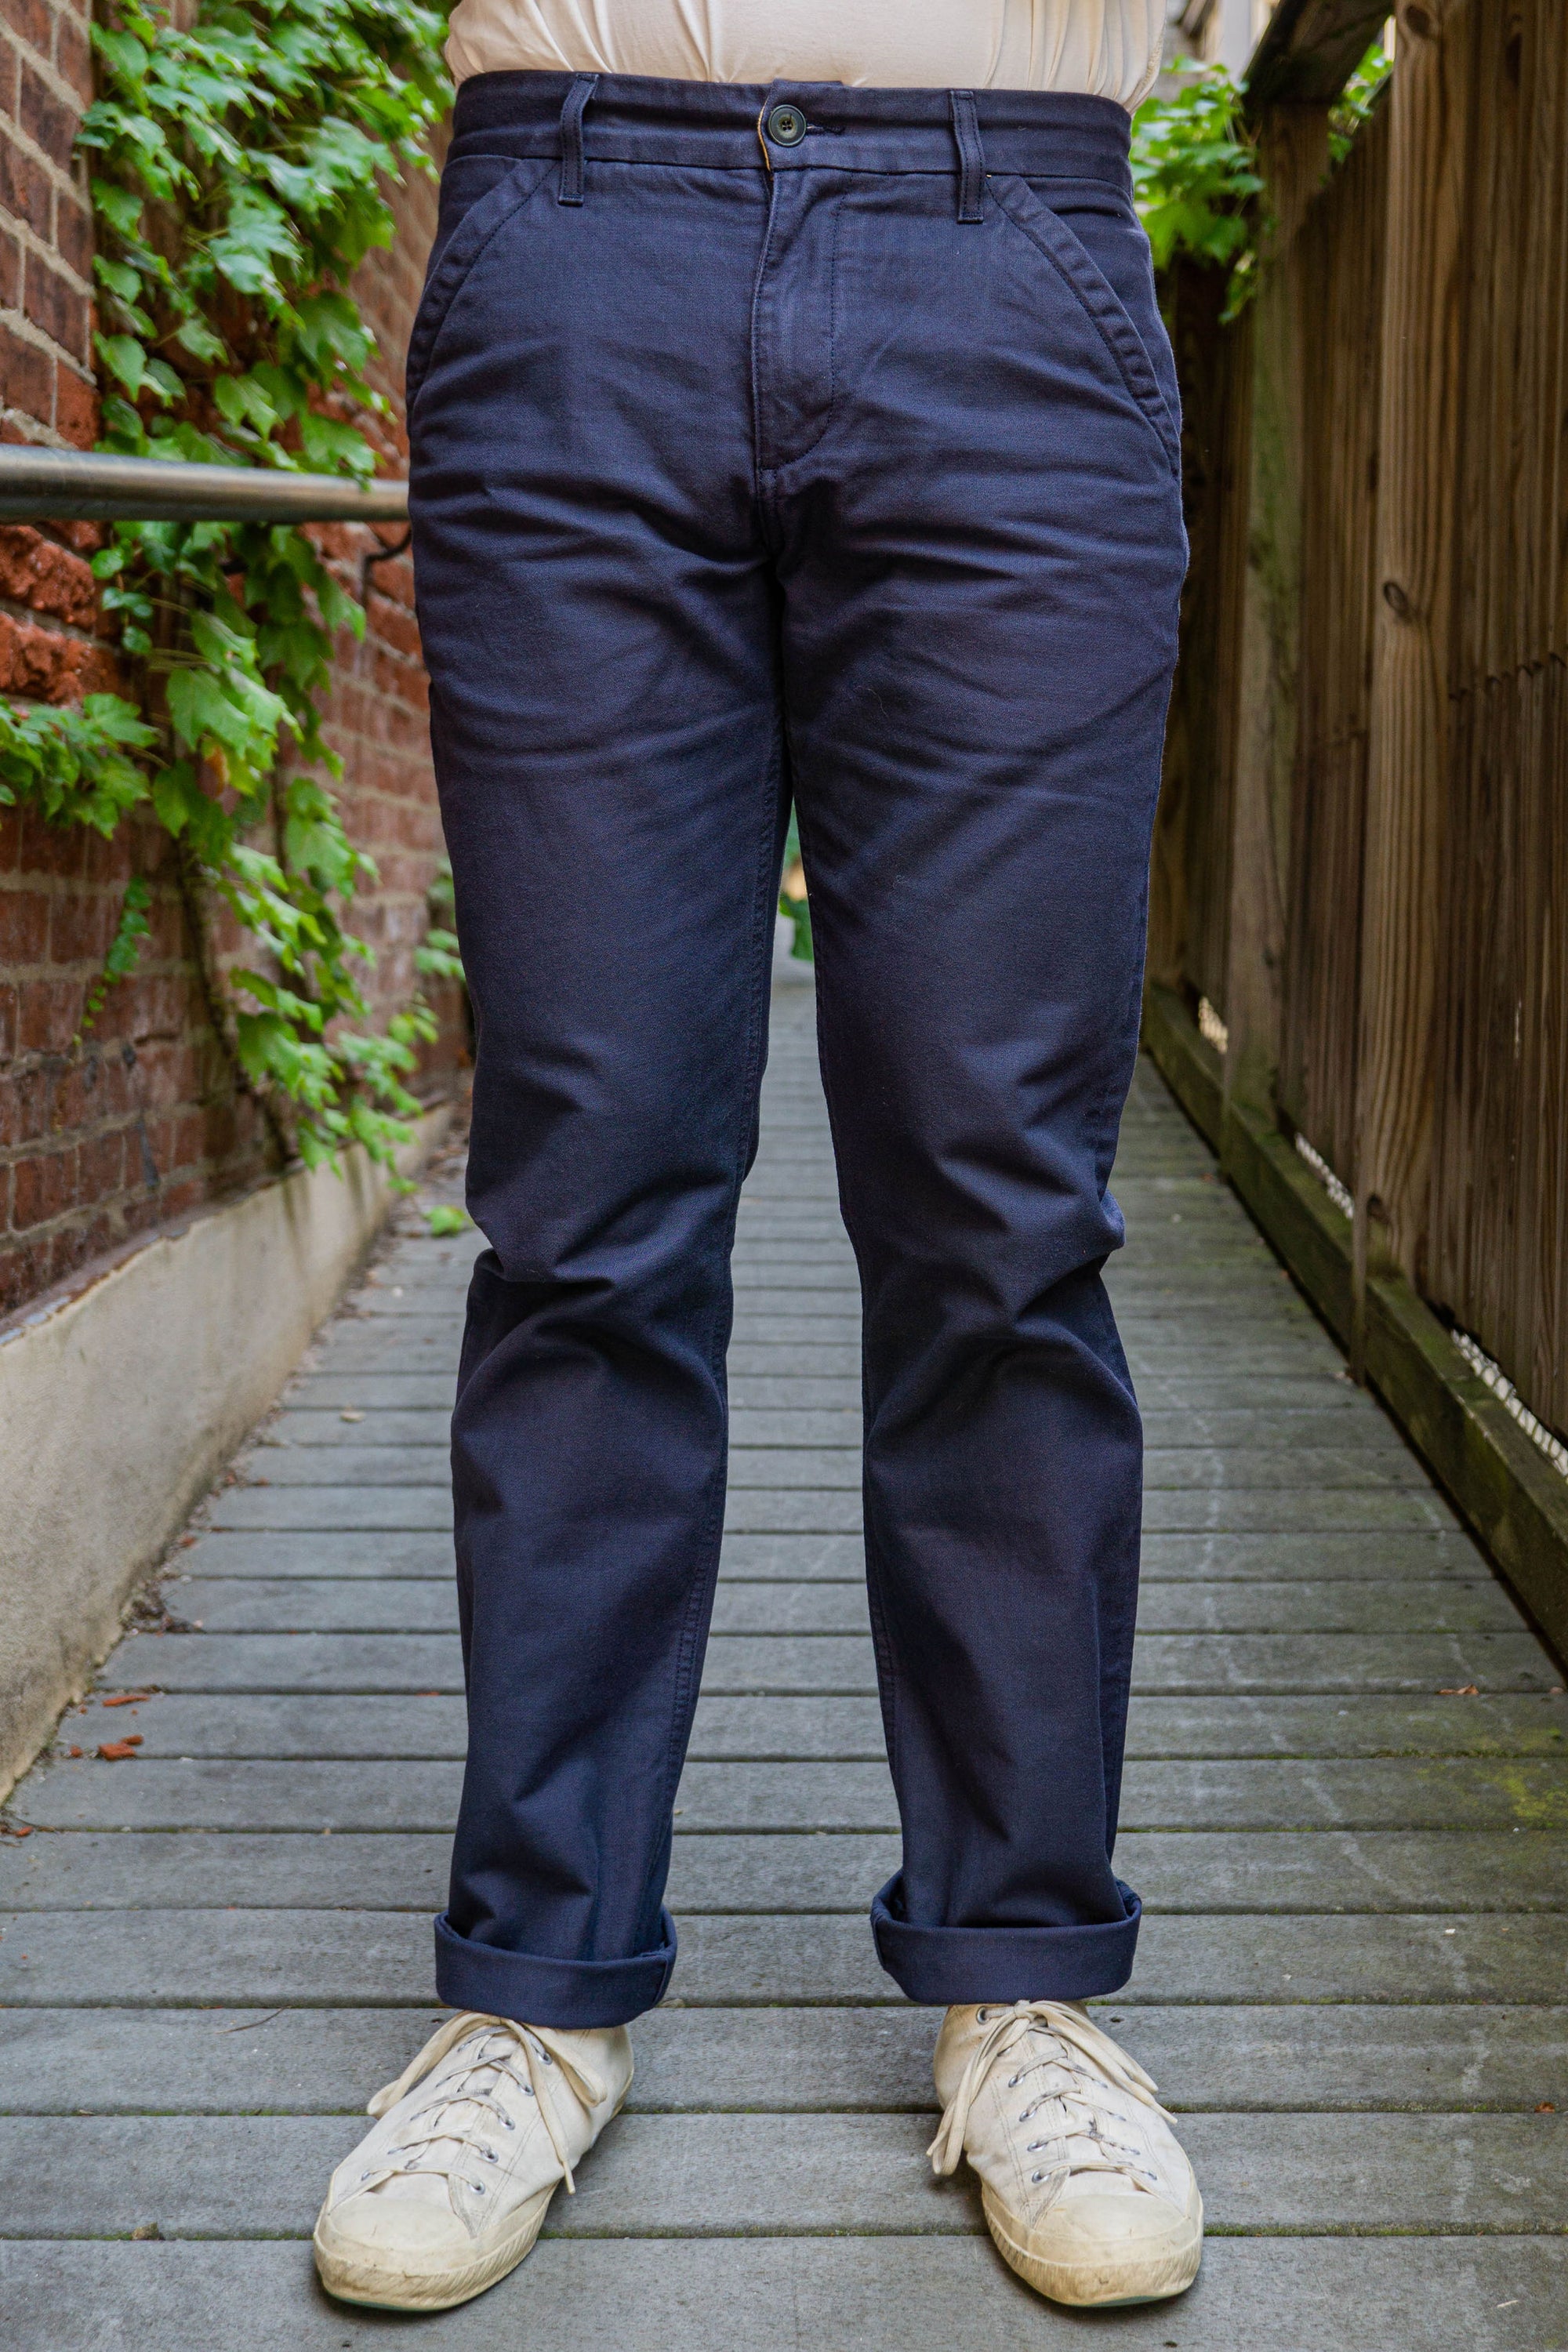 Freenote Cloth Workers Chino Slim Fit - Navy